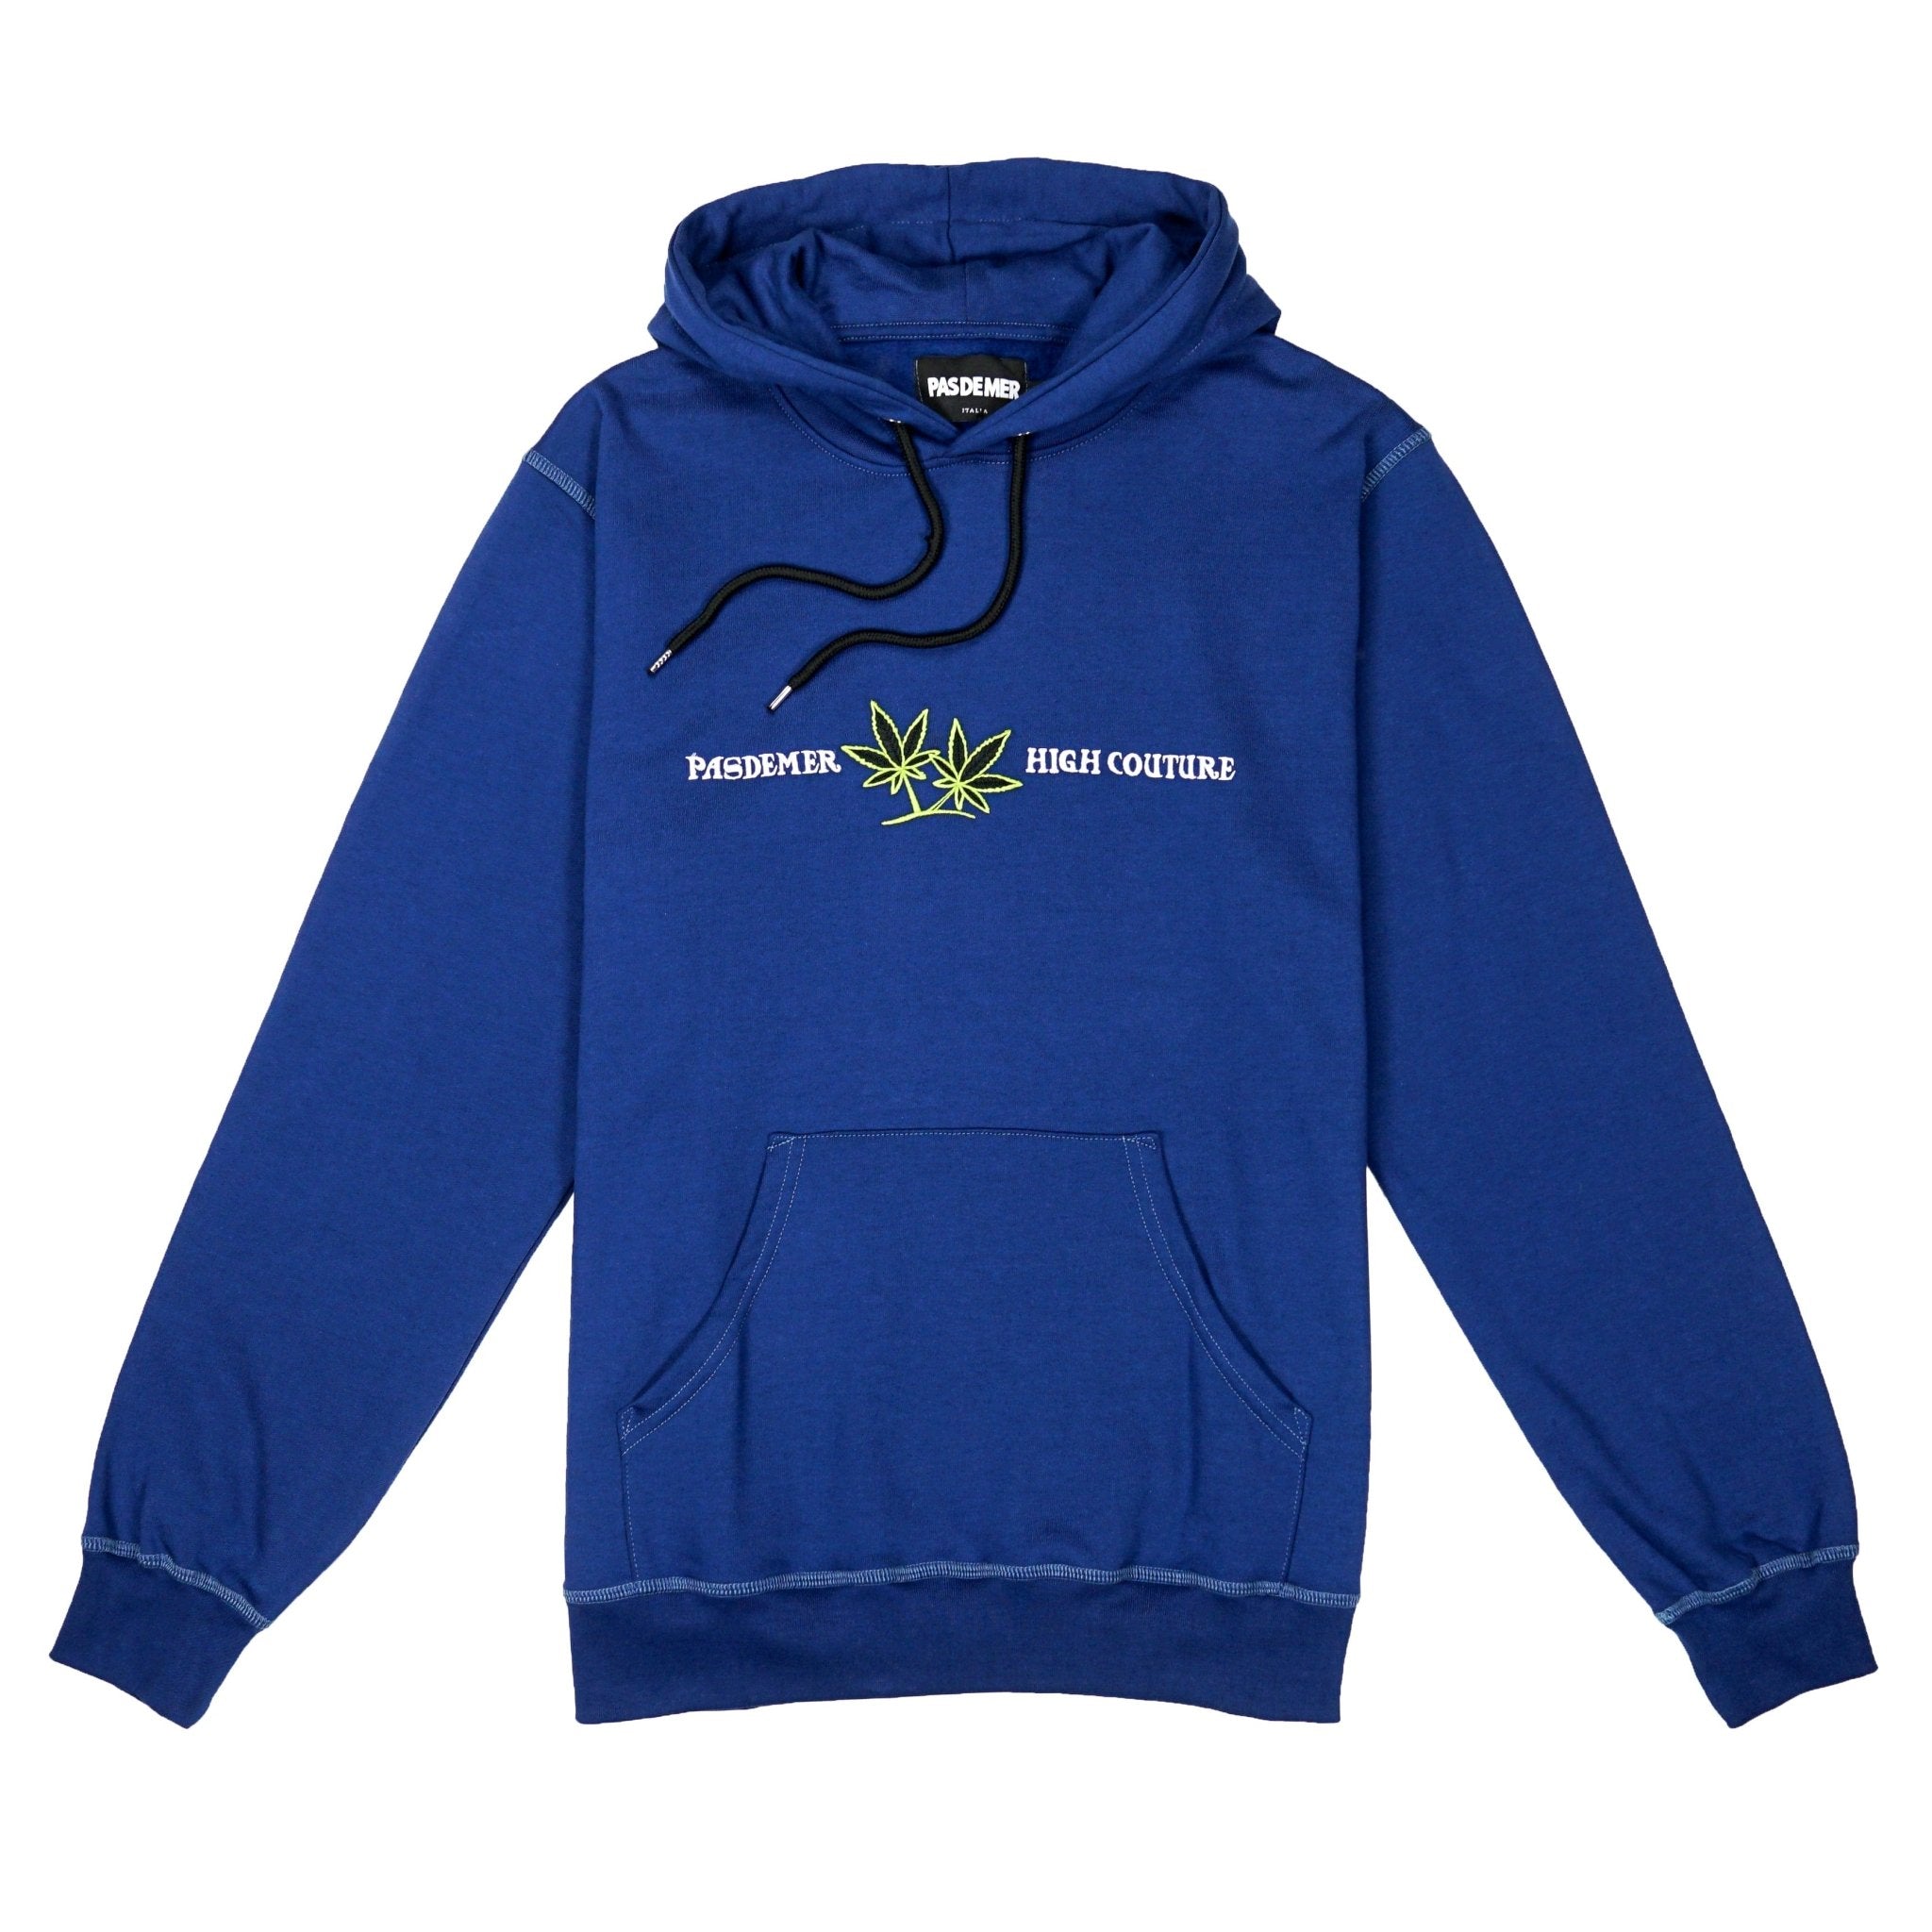 High Couture Hoodie in navy - Pas de Mer - State Of Flux